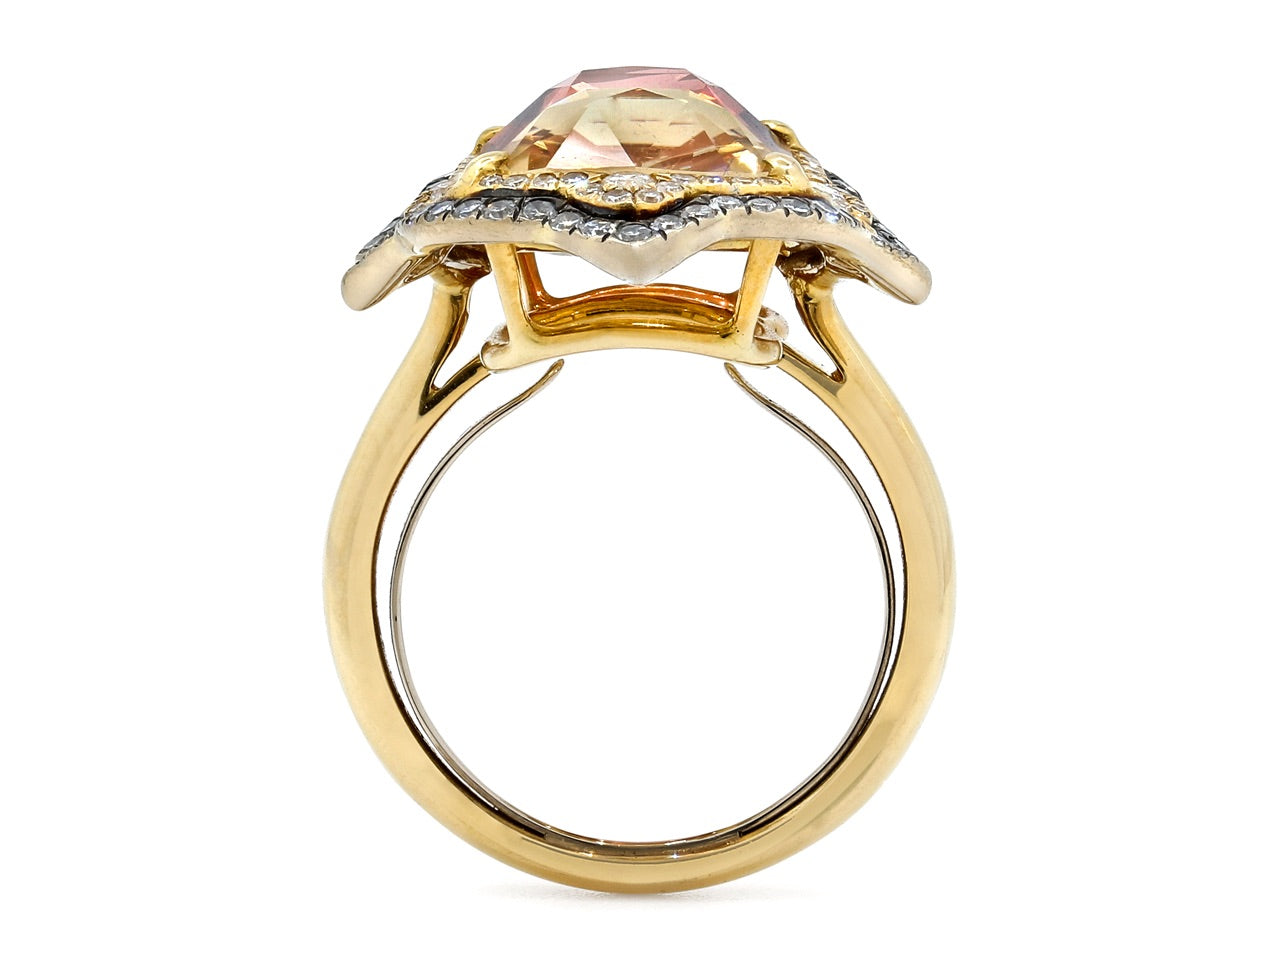 IVY Double Tourmaline Ring in 18K Gold